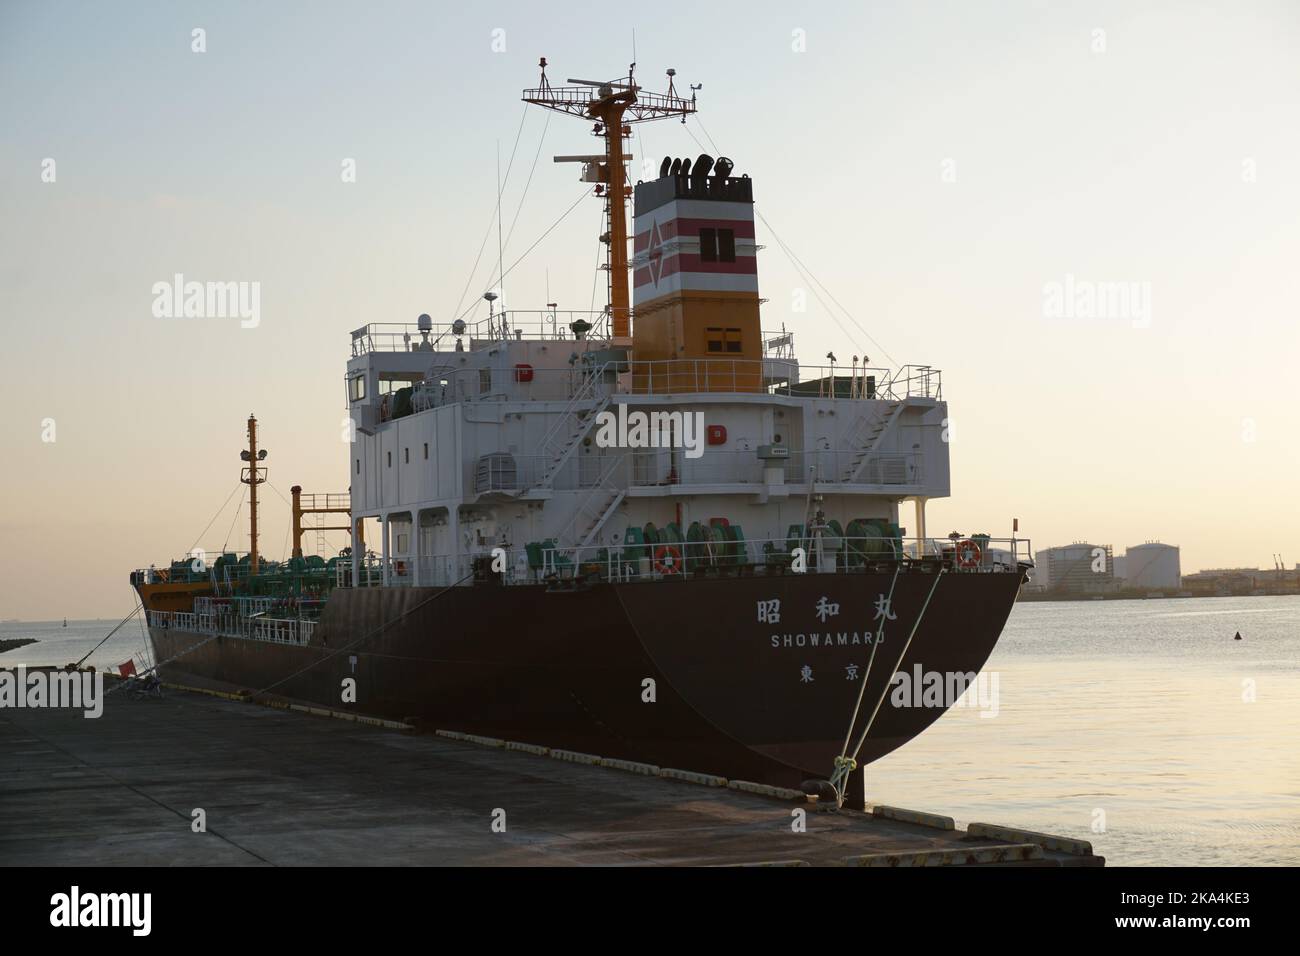 A docked Showamaru boat at sunset in the Chiba Port, Japan Stock Photo